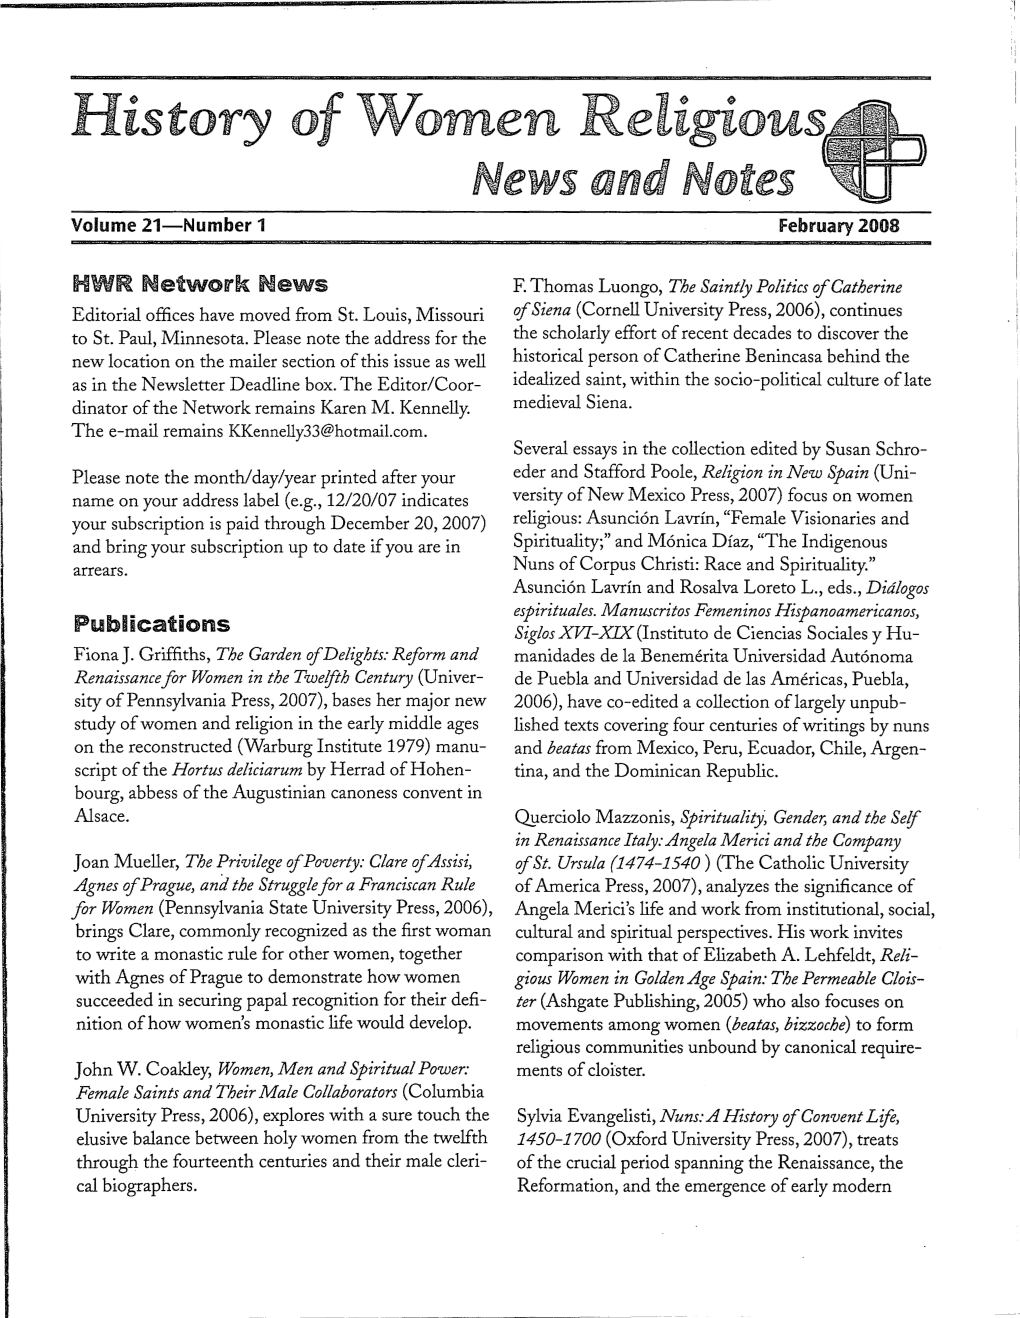 History of Women Religious Ews and Otes Volume 21-Number 1 February 2008